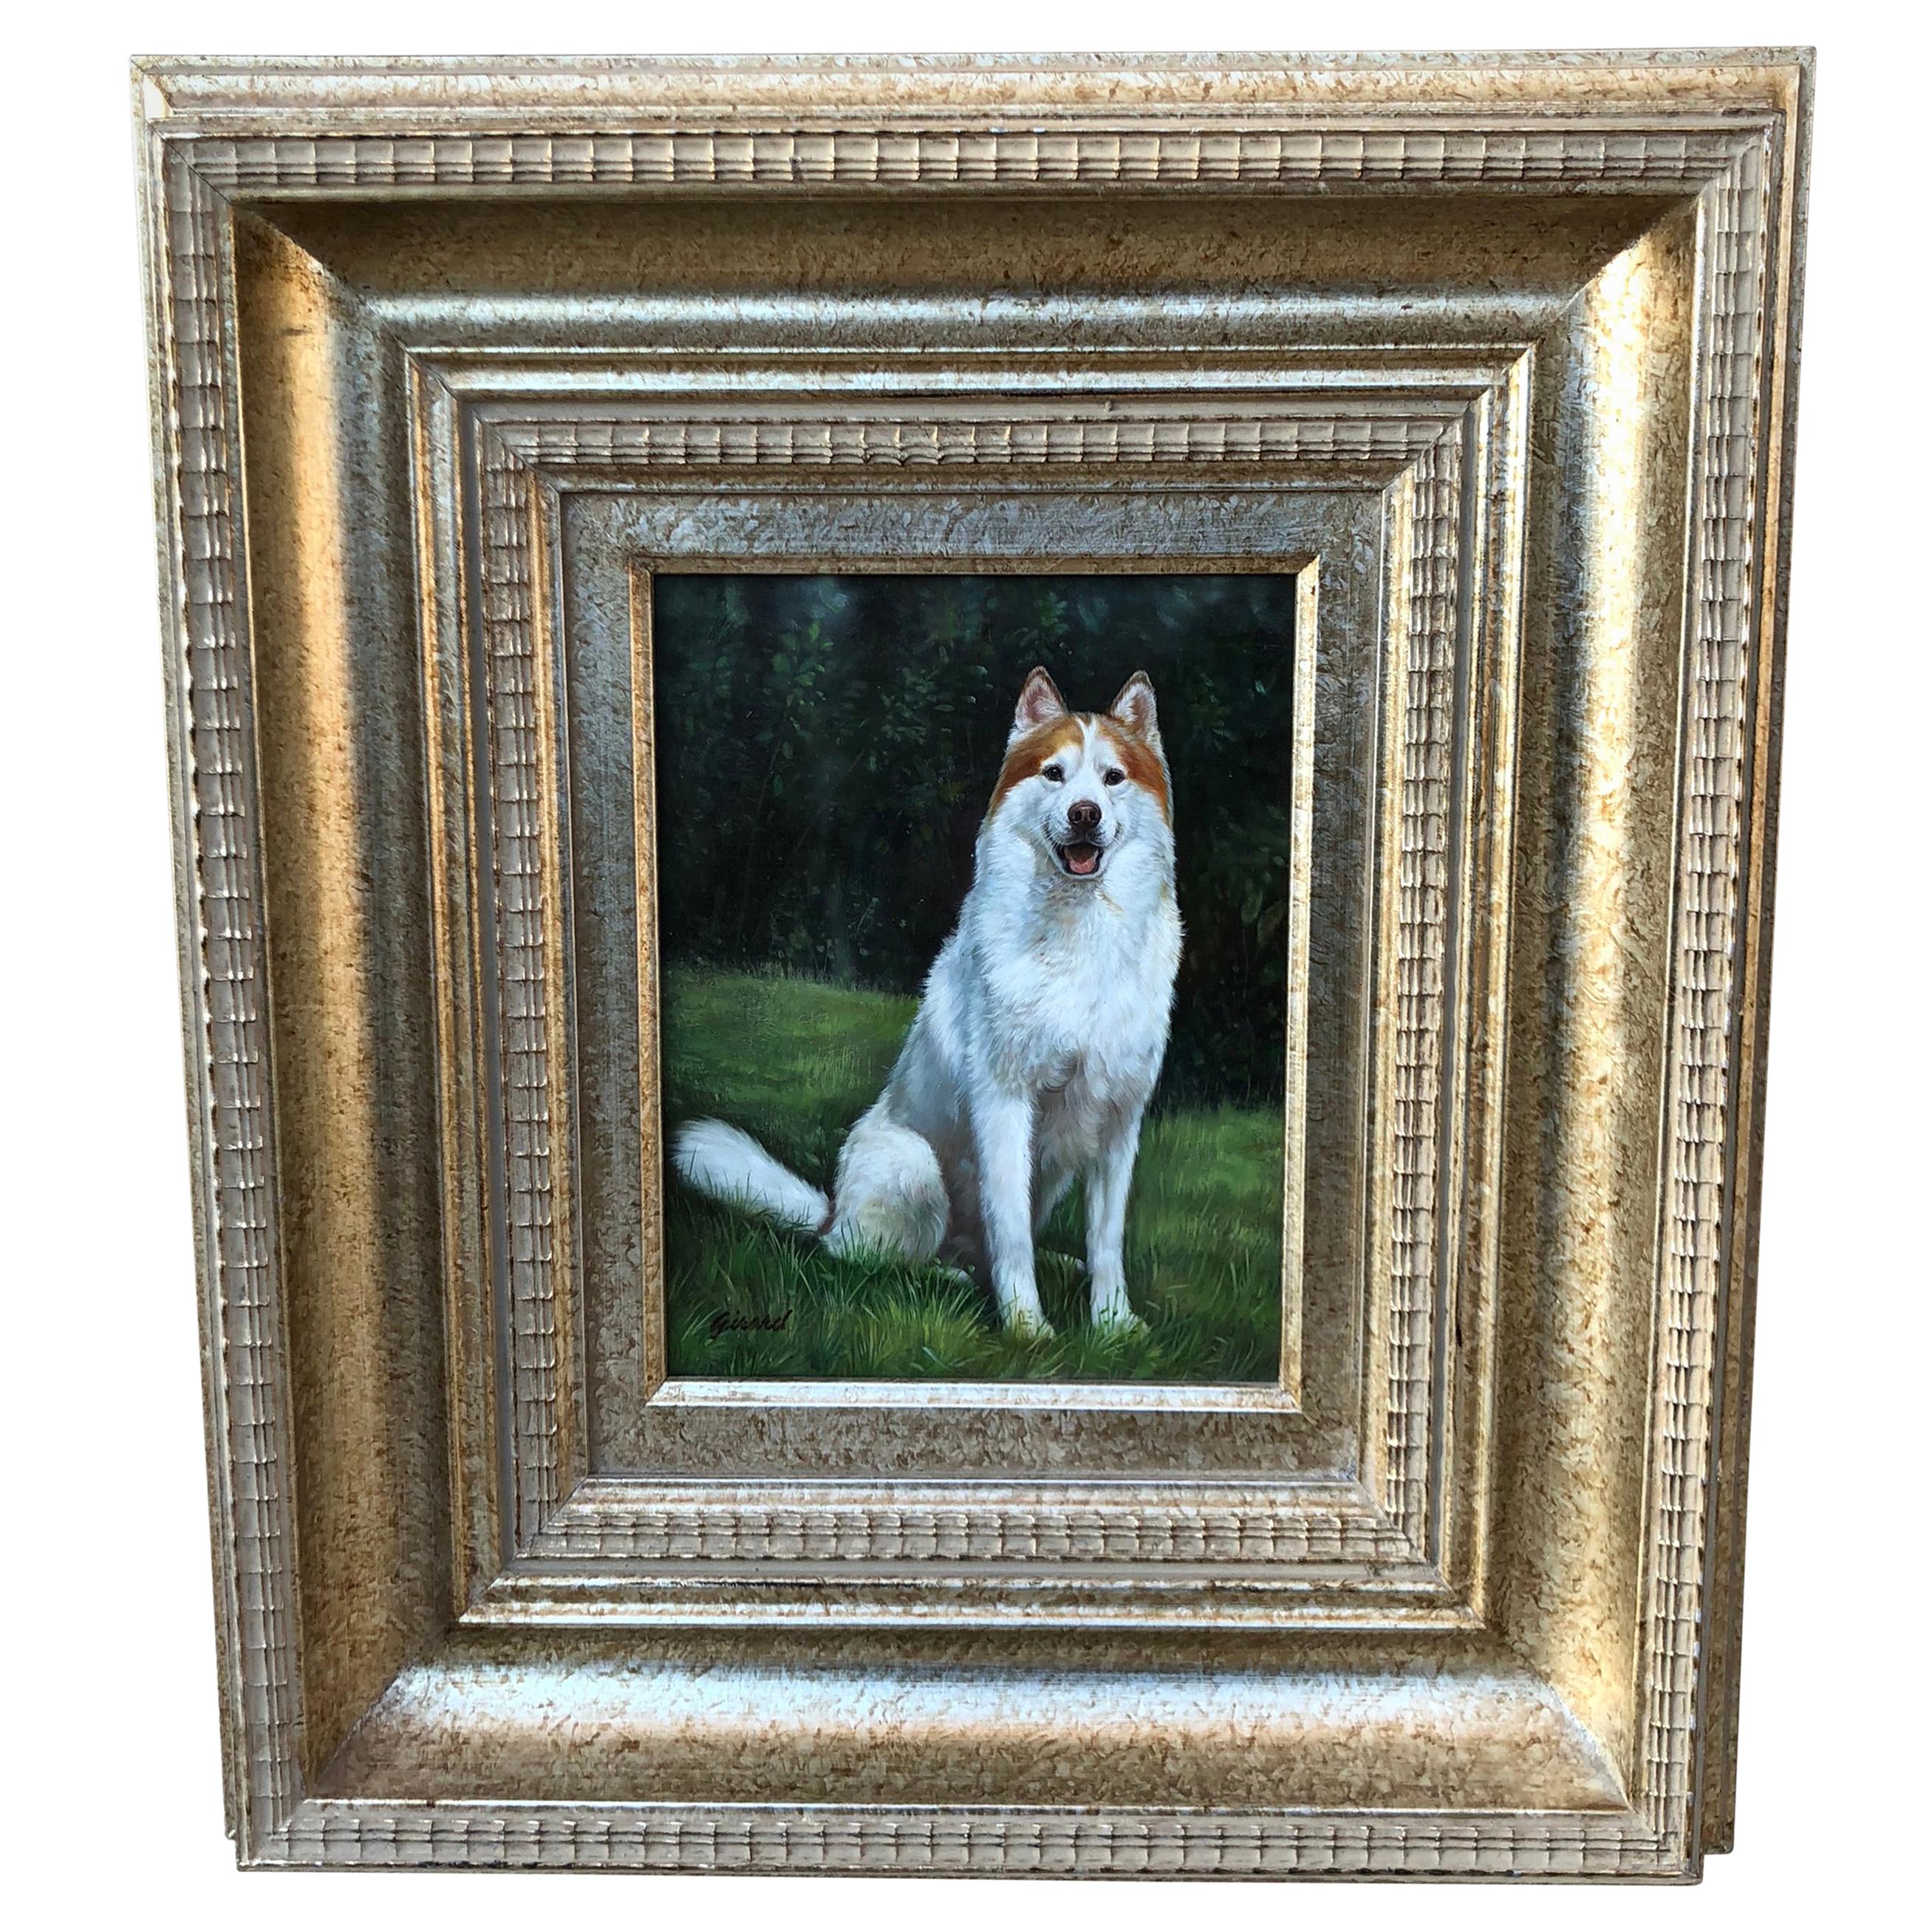 Excellent Quality Original Oil Painting of a Husky Dog by French Artist Girard